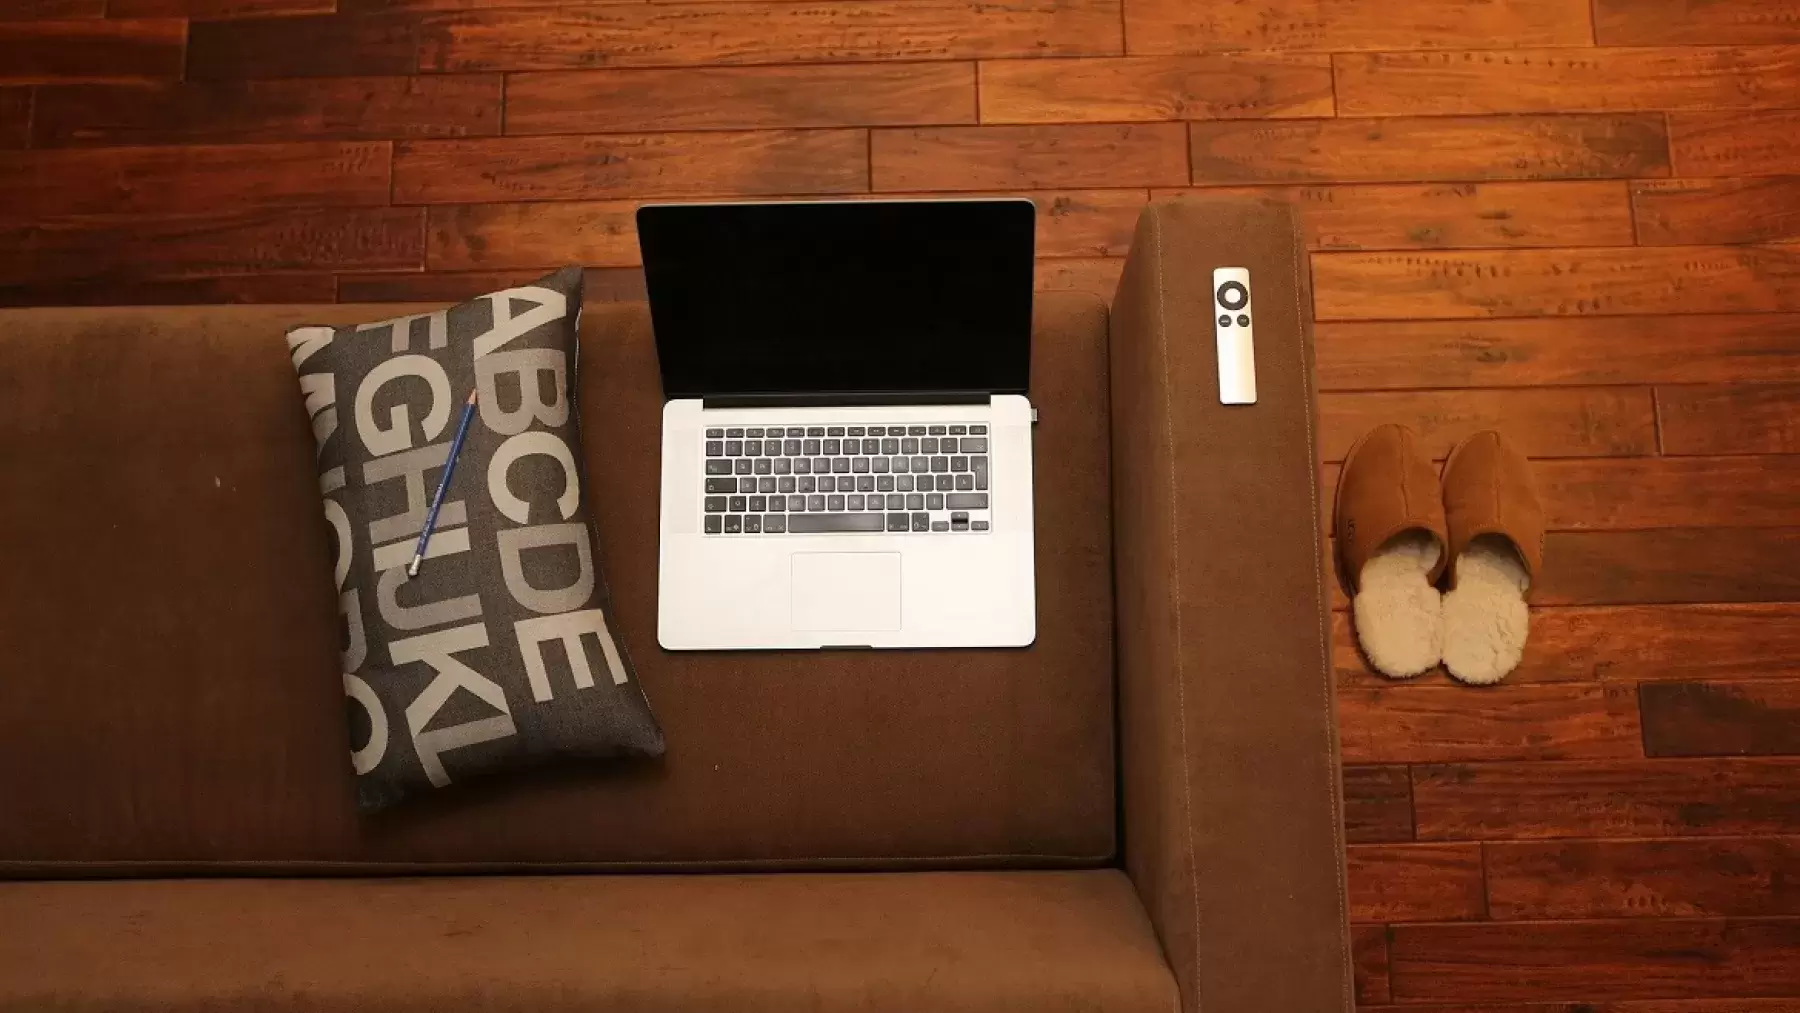 A laptop on top of a brown sofa with shoes nearby.